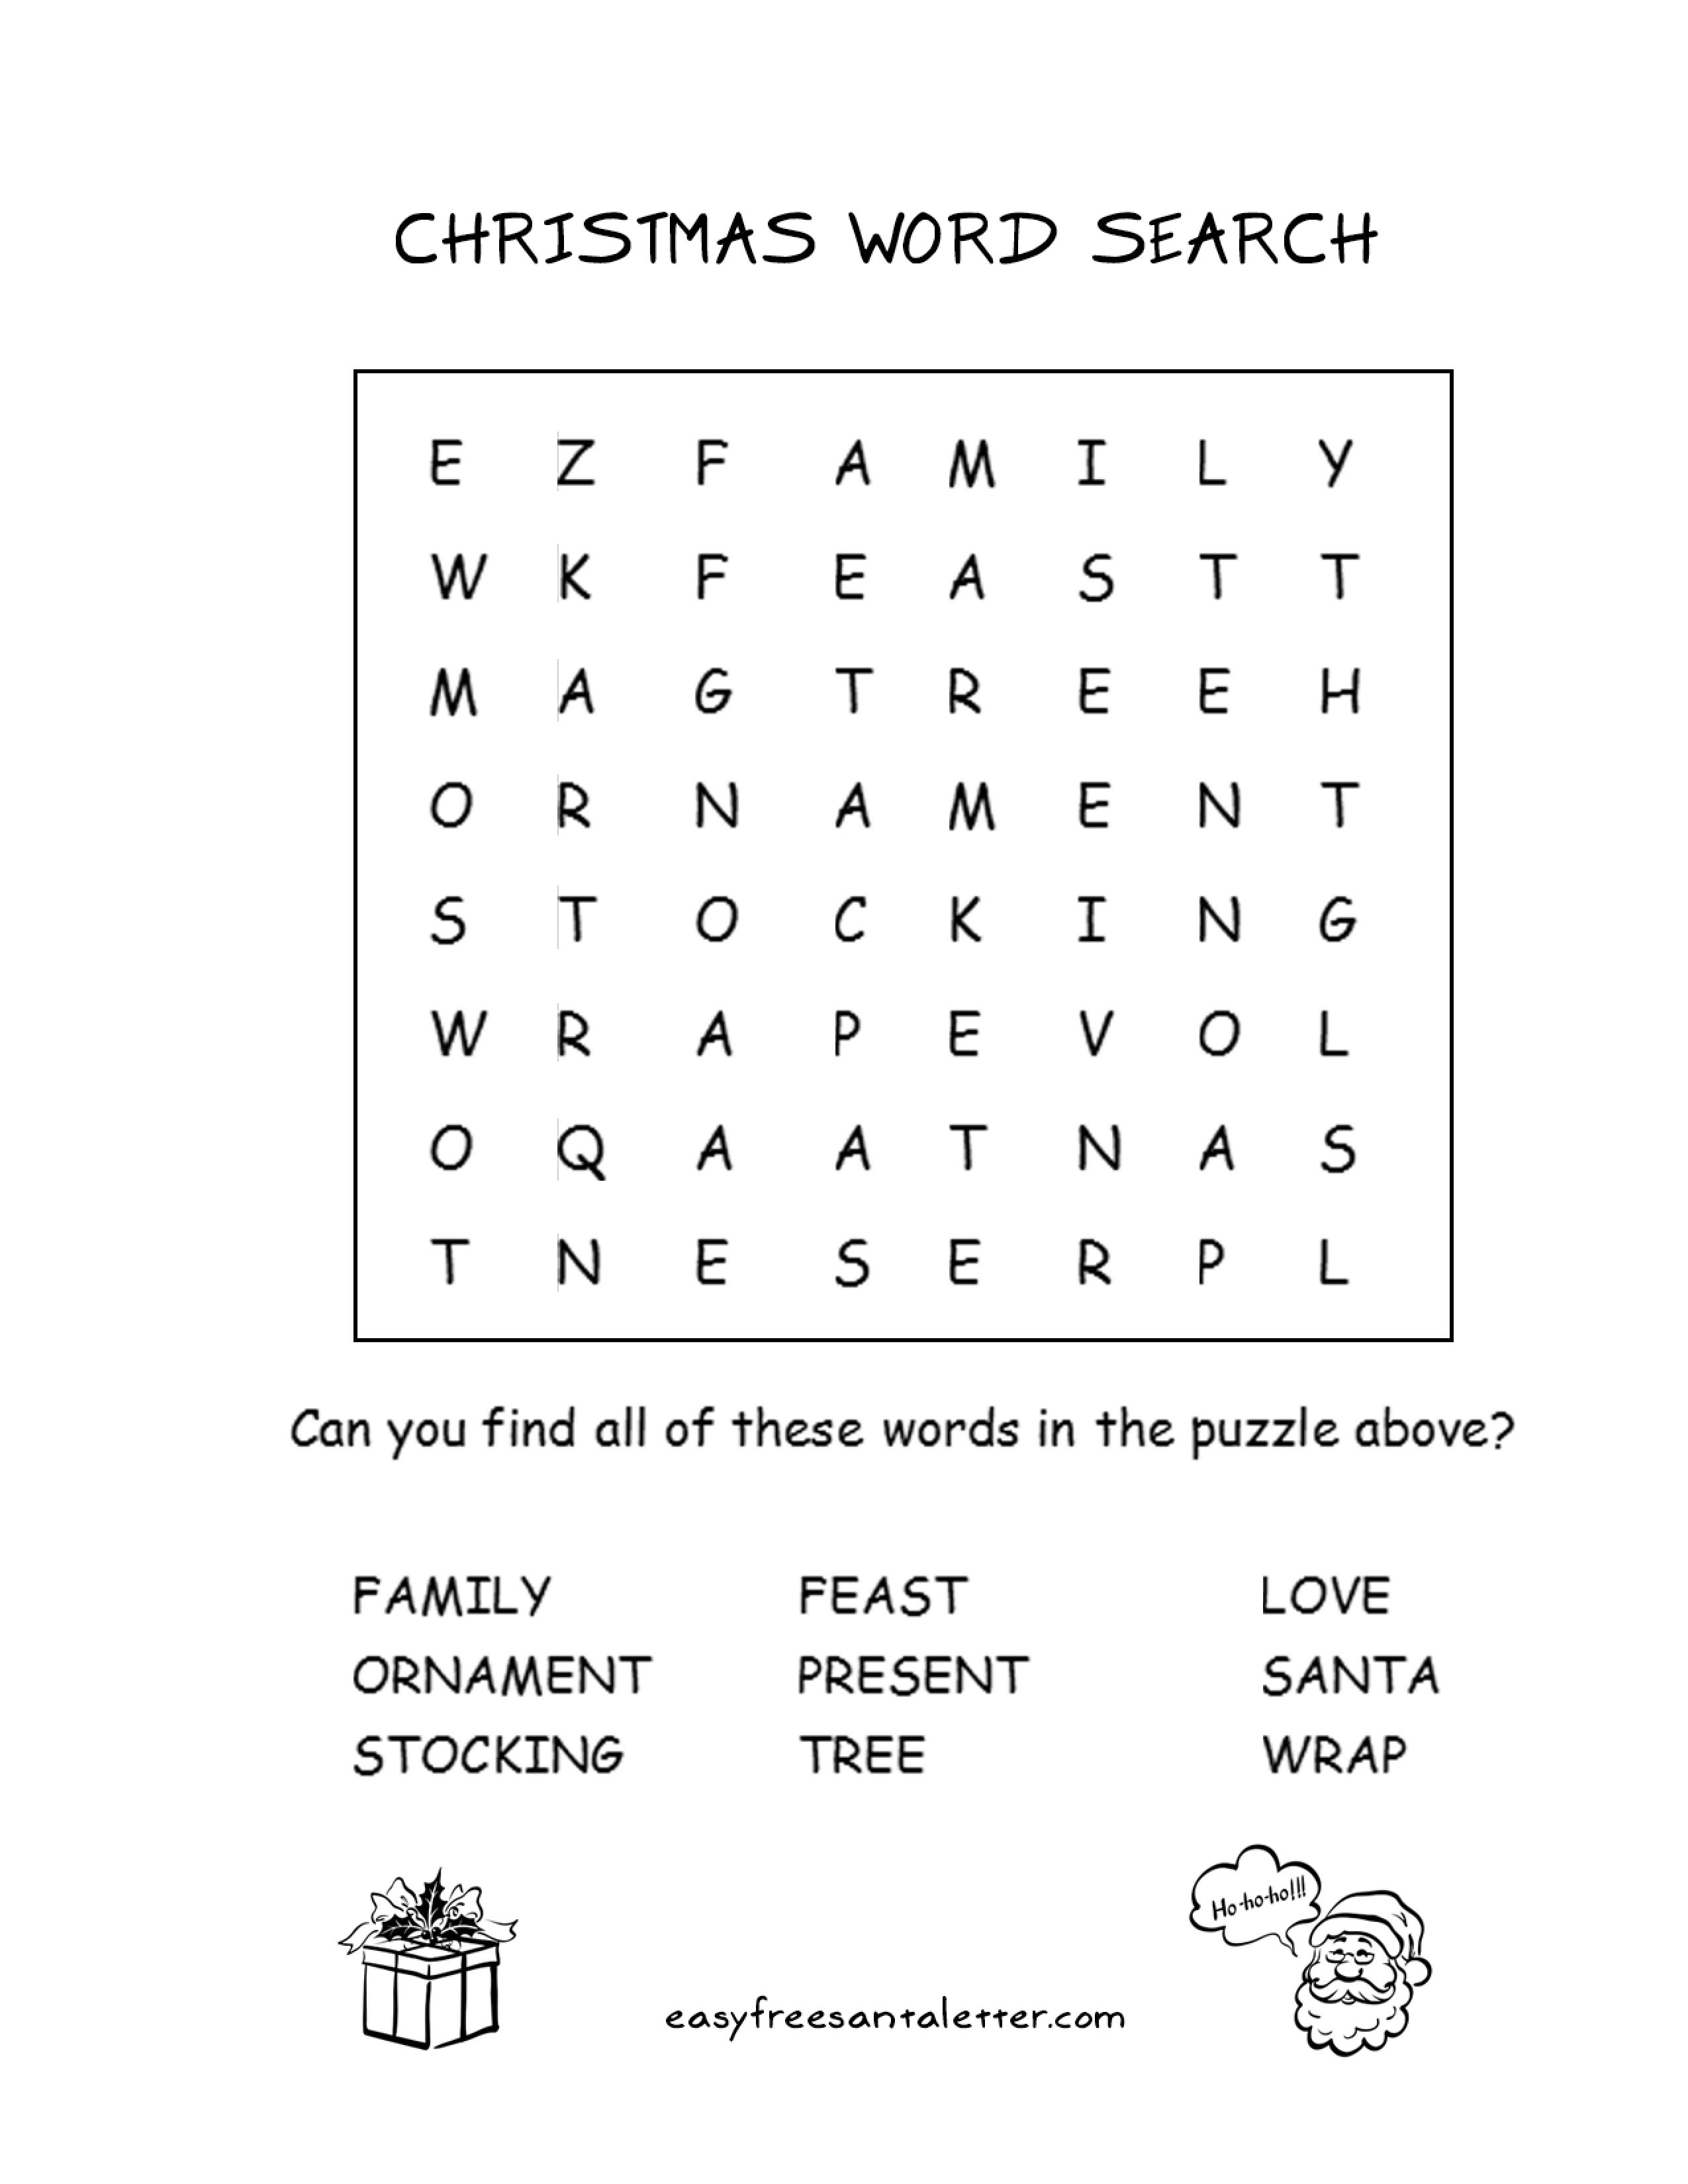 Free Printable Christmas Word Search! | Letters From Santa Christmas - Free Printable Christmas Word Search Pages